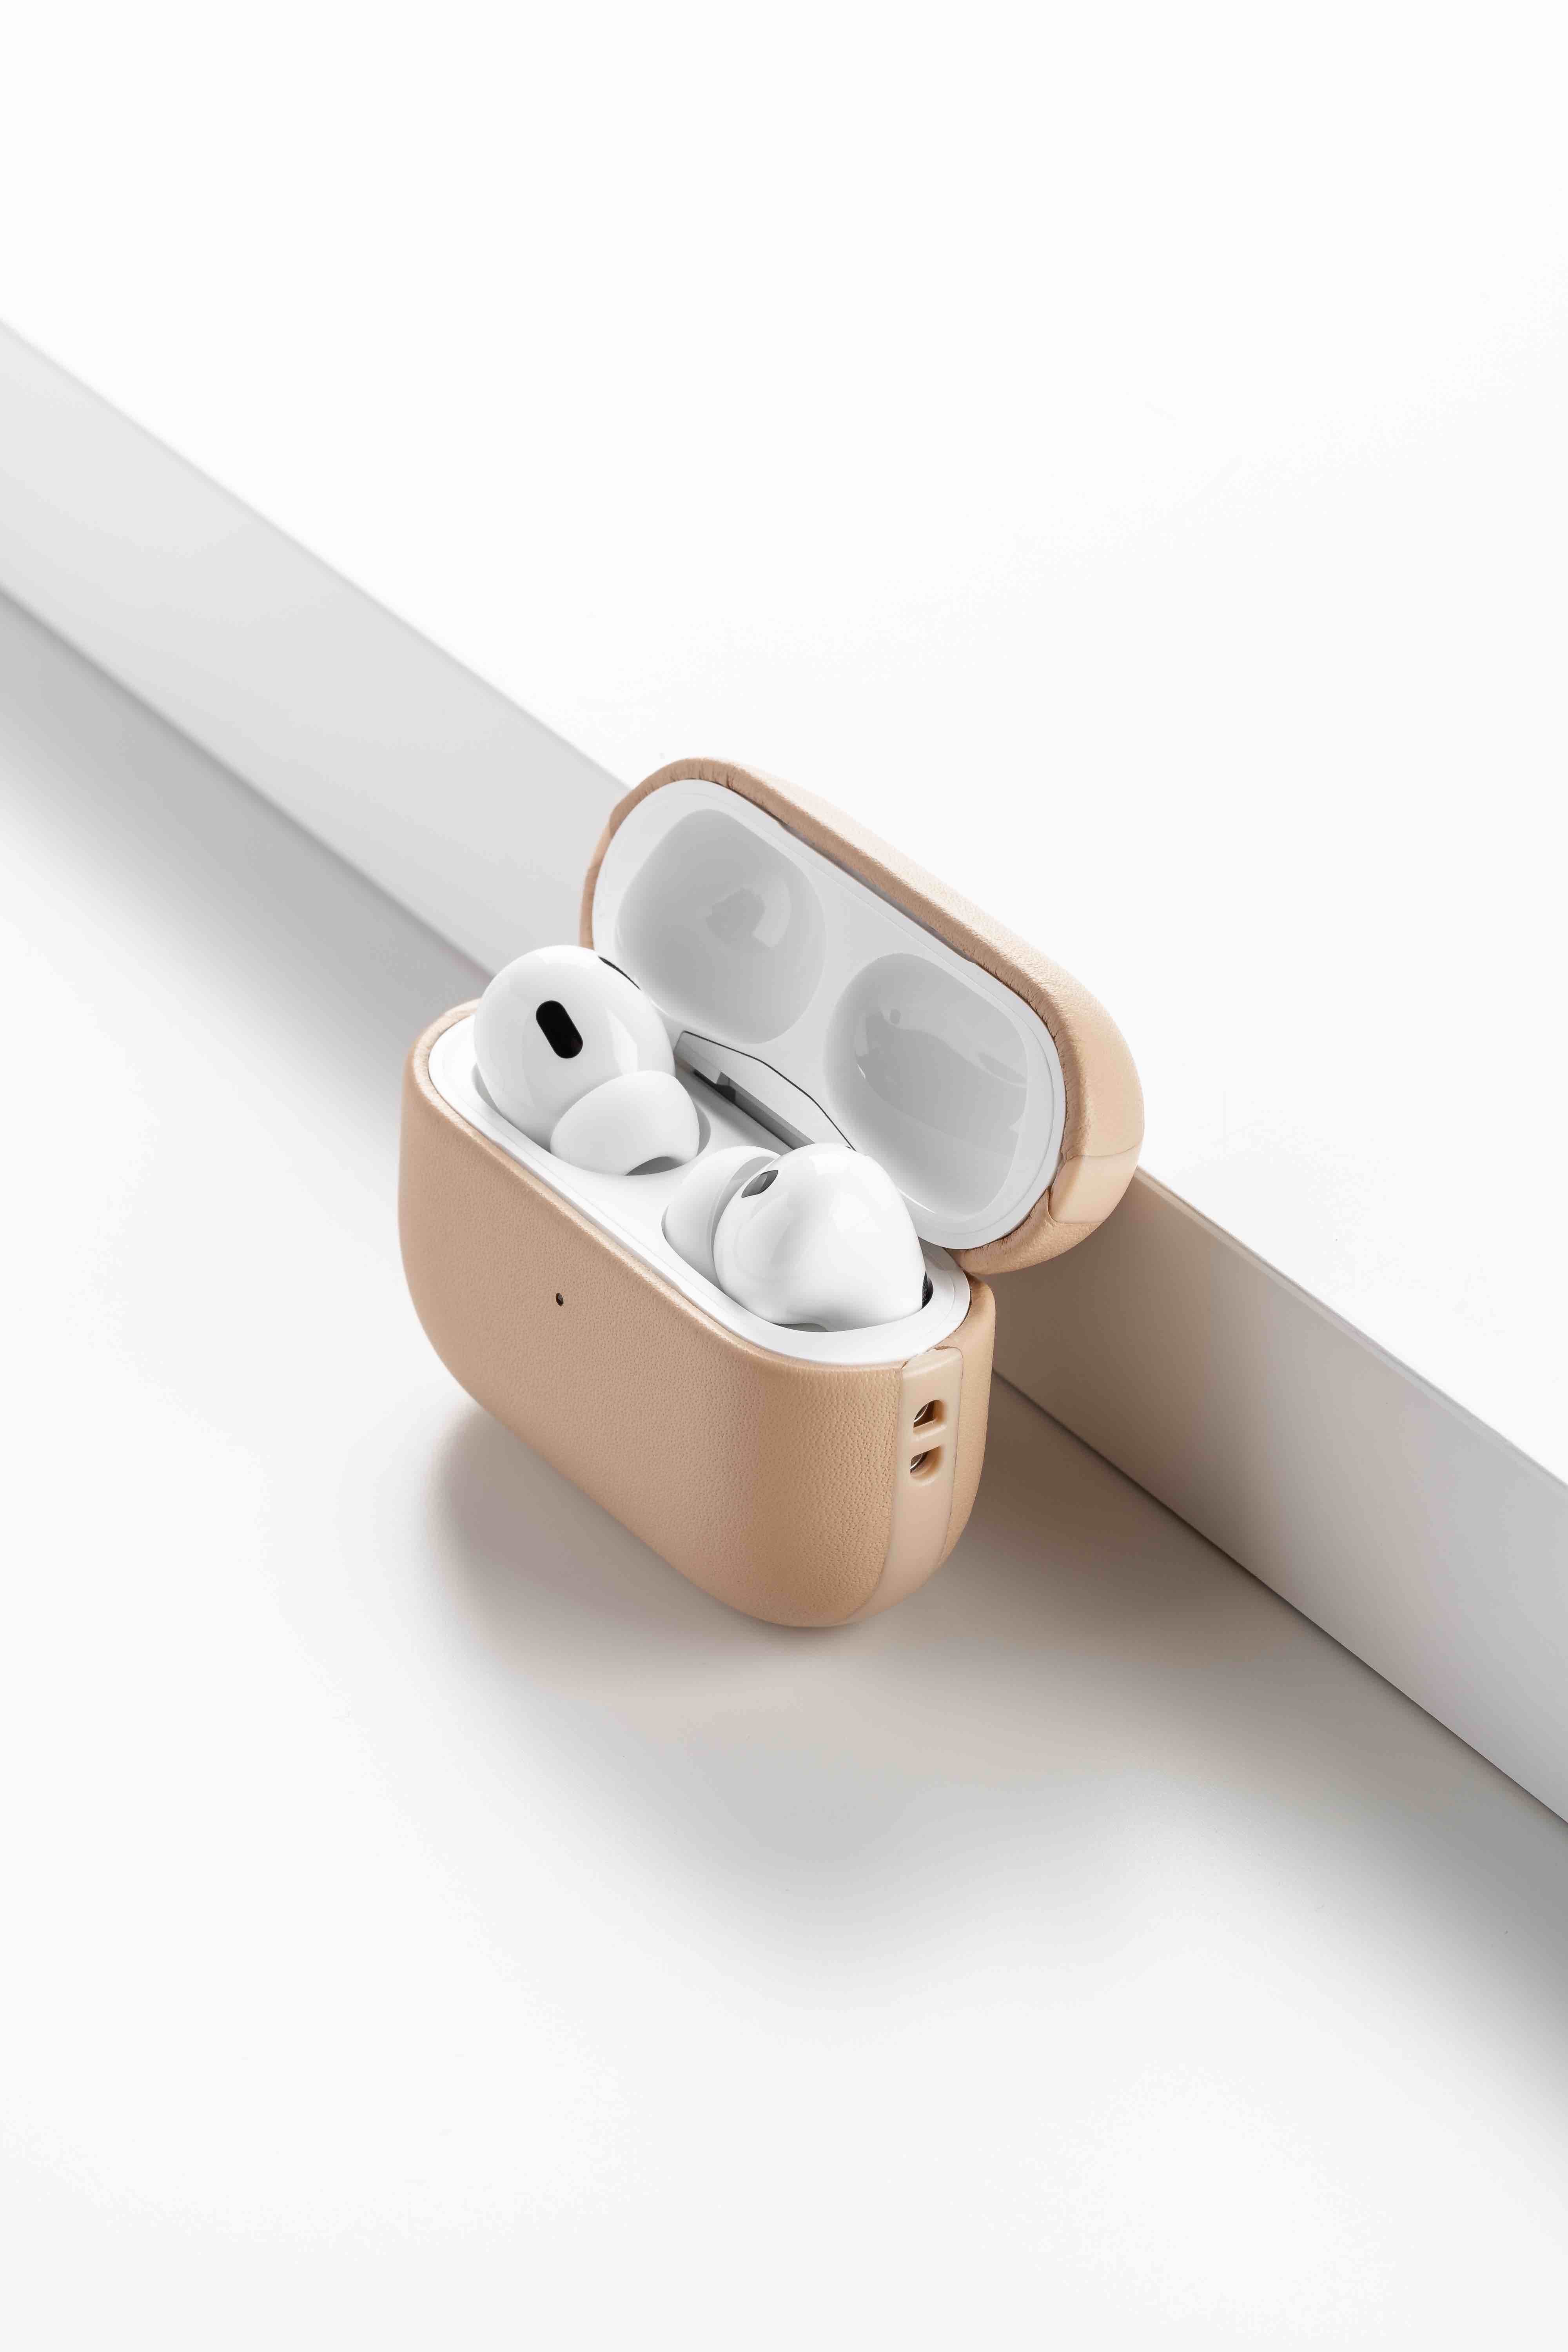 nomad natural airpods pro 2 case